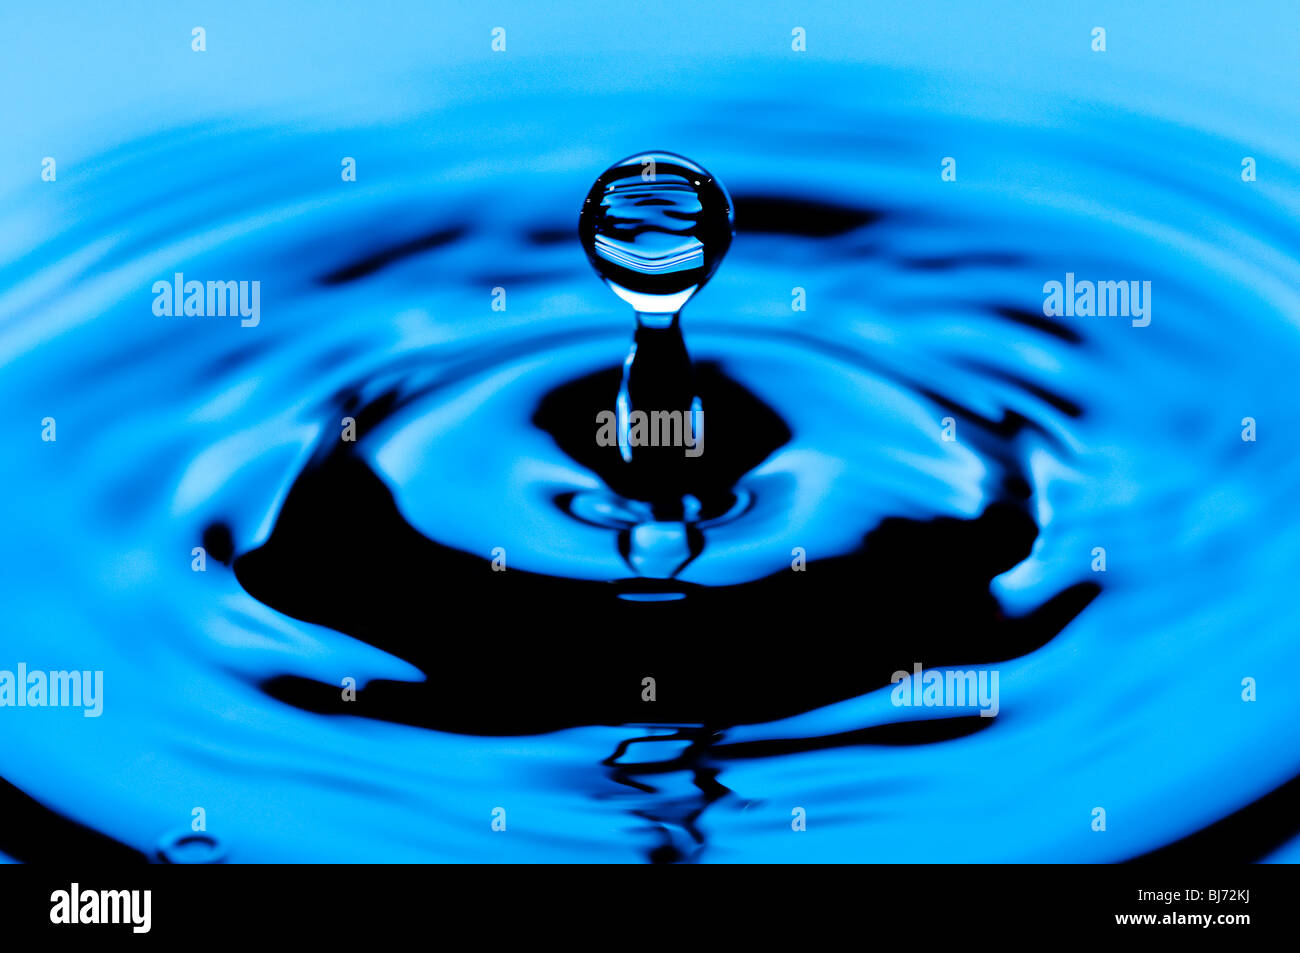 abstract blue drop of water Stock Photo